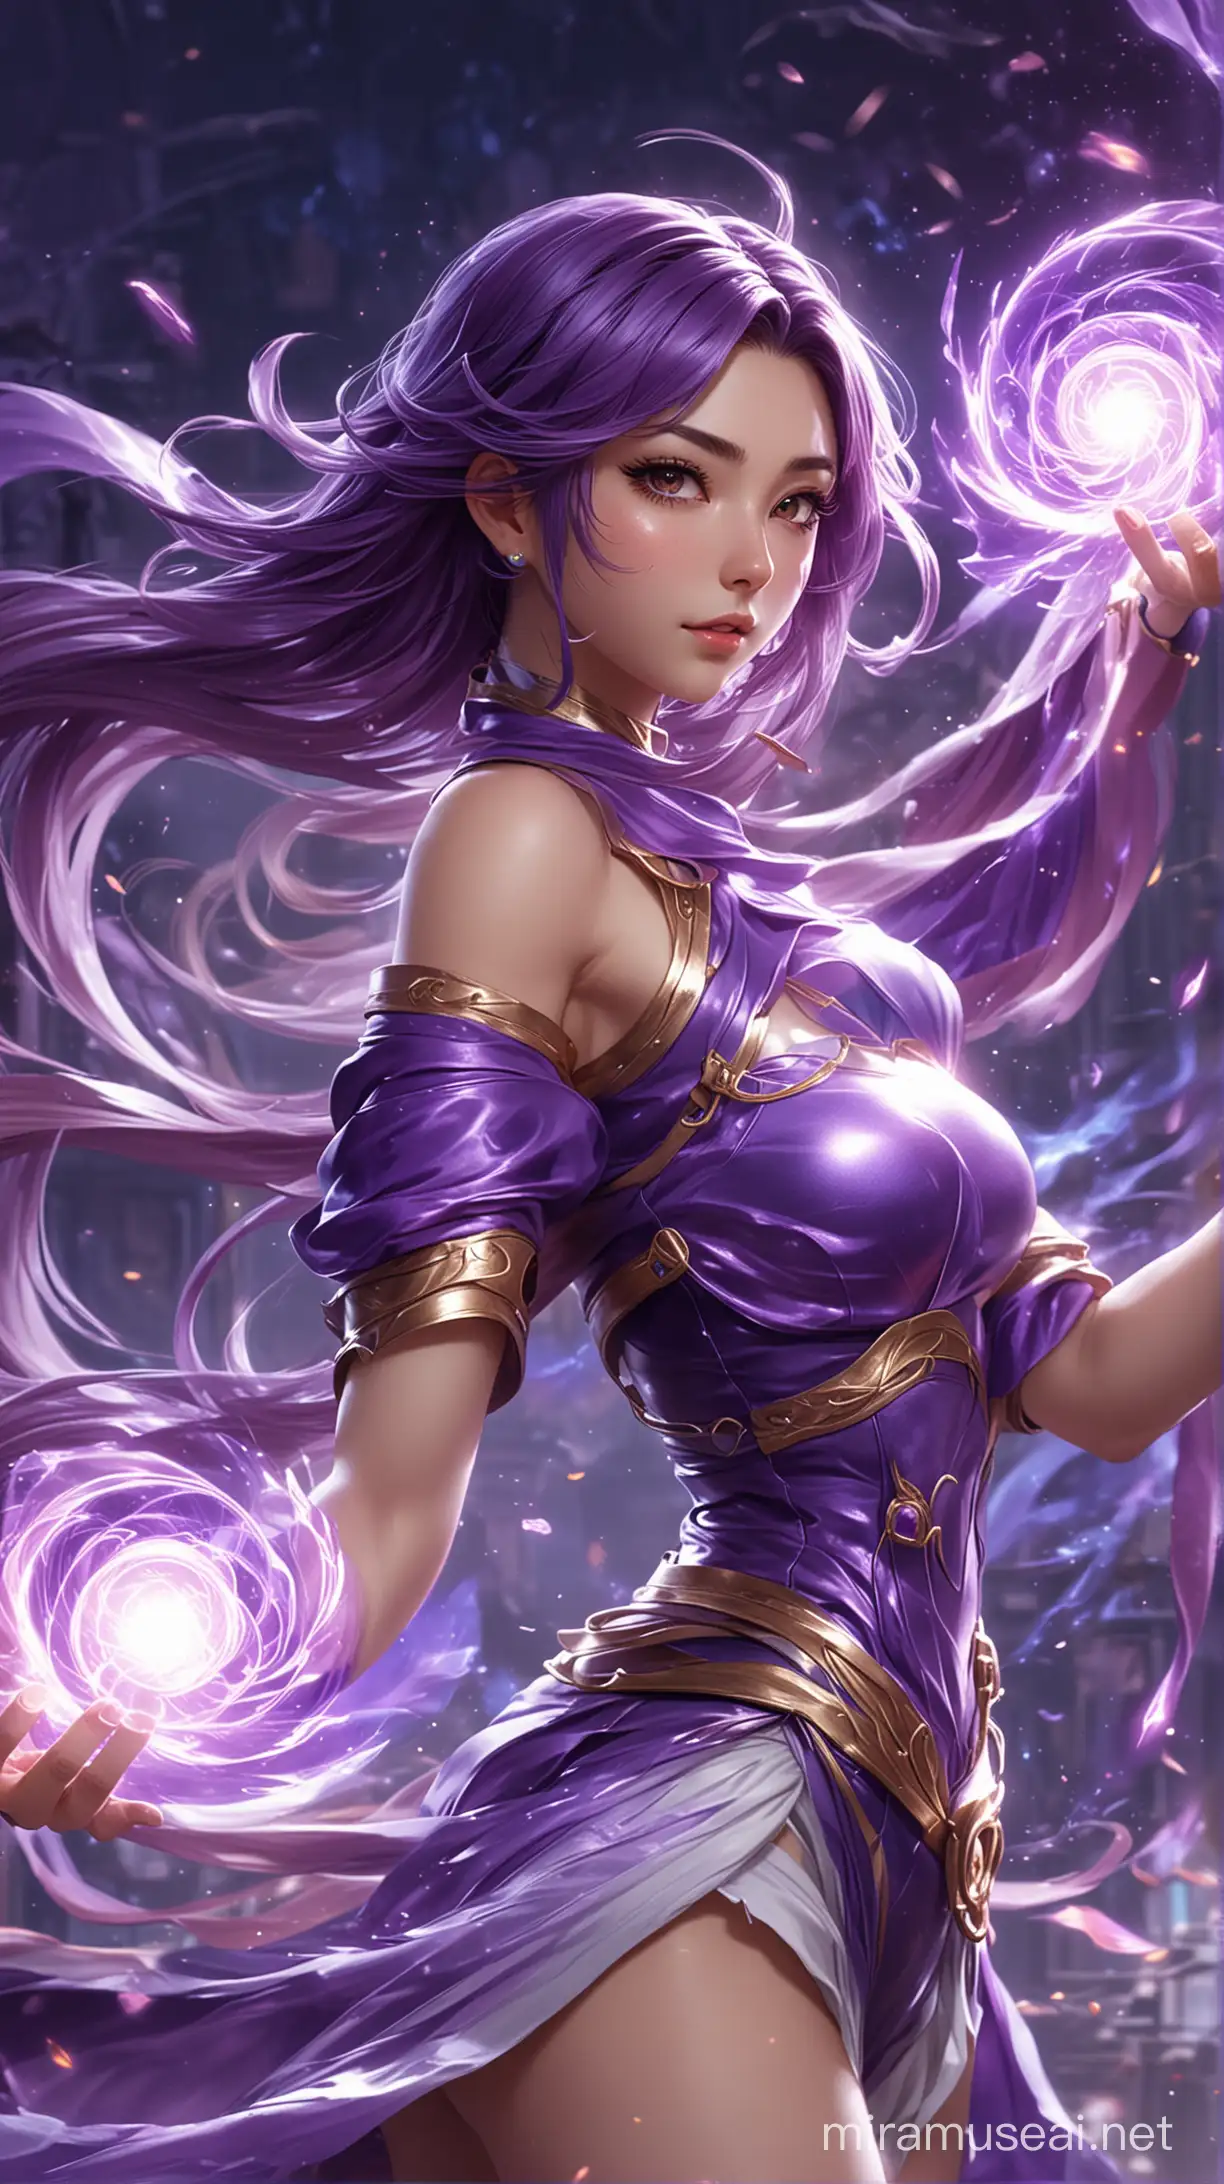 A stunning realistic anime illustration featuring a side view of a female character of mobile legend game,Miya looking to the viewer. Surrounding her, a captivating purple energy aura swirls and dances, capturing the essence of the oil element technic